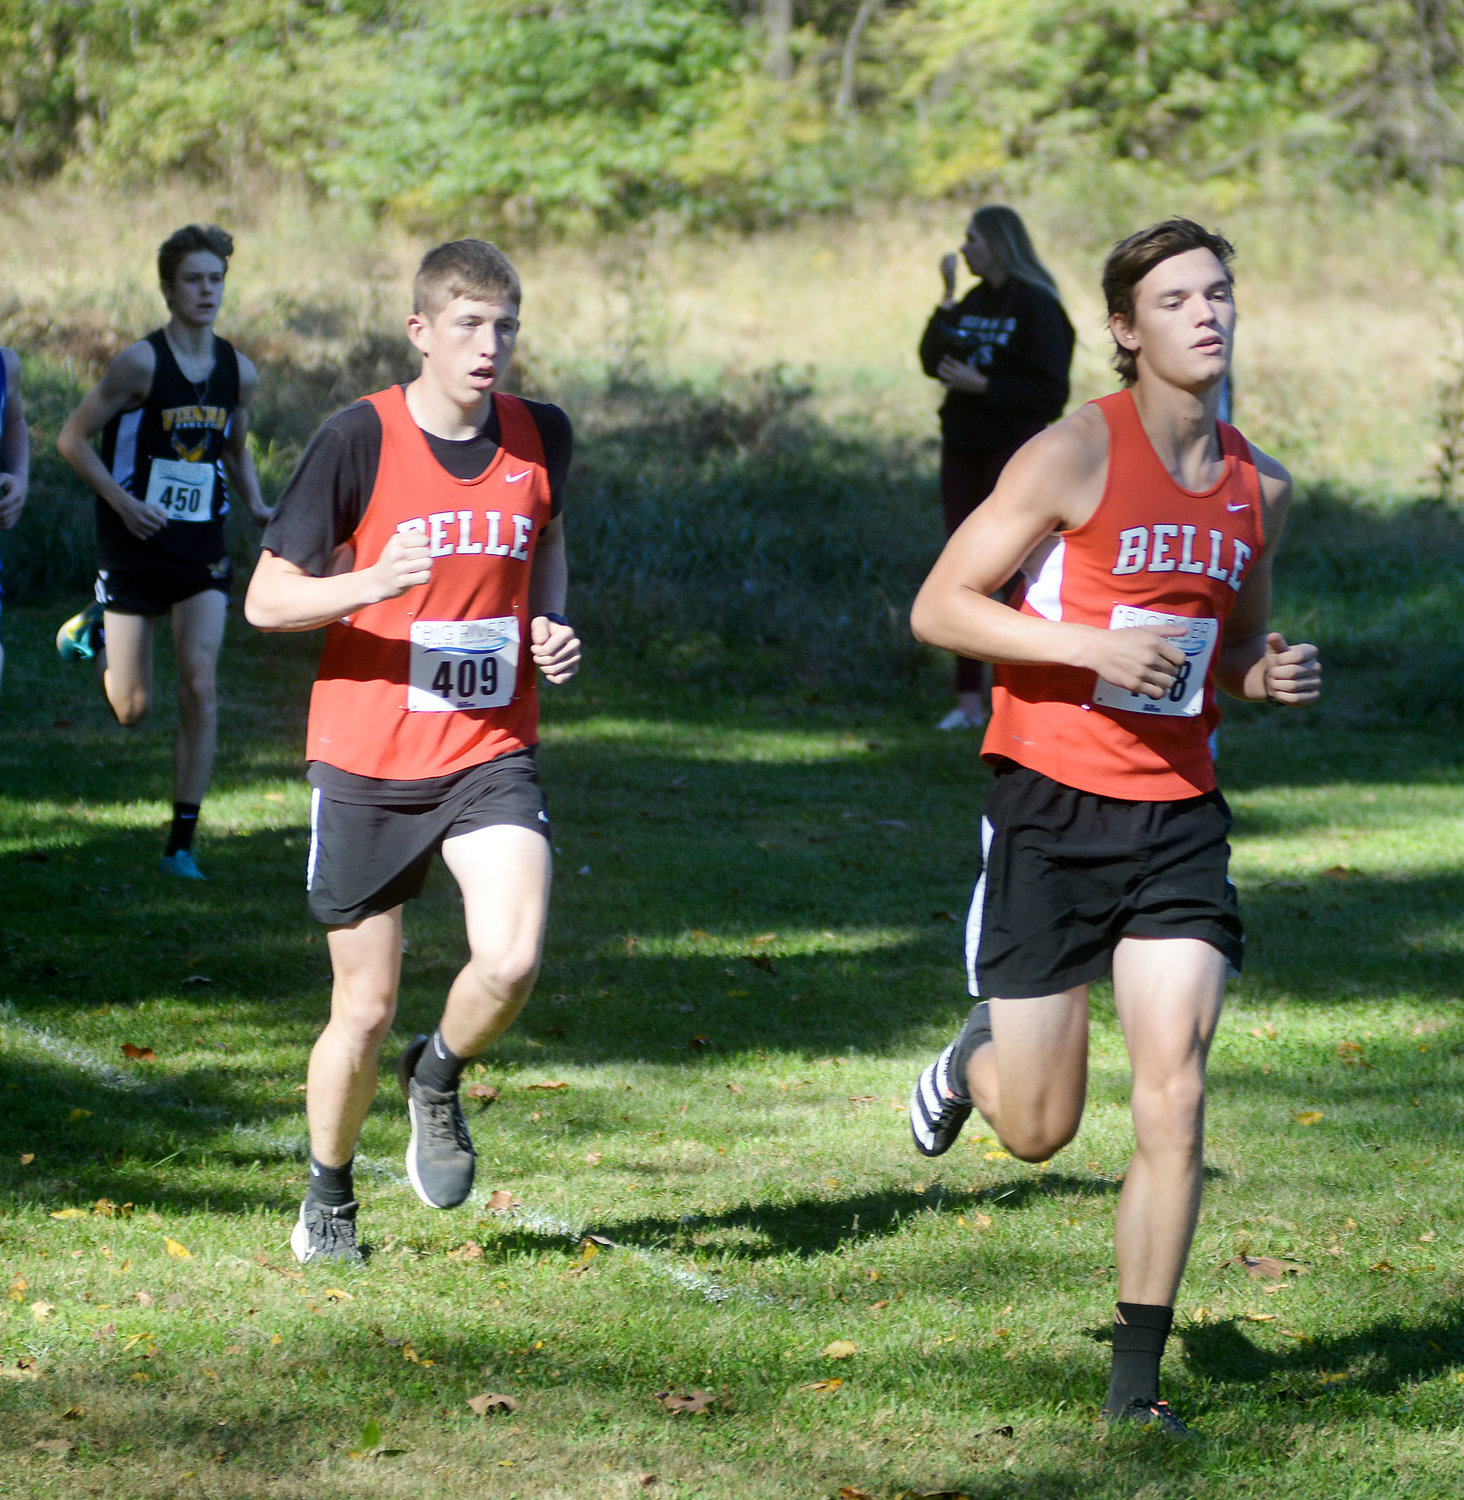 Baylar Smith and Corey McDaniel (from left) run together in the early stages of the varsity boys race Friday during the Gasconade Valley Conference (GVC) Cross Country meet in Steelville.